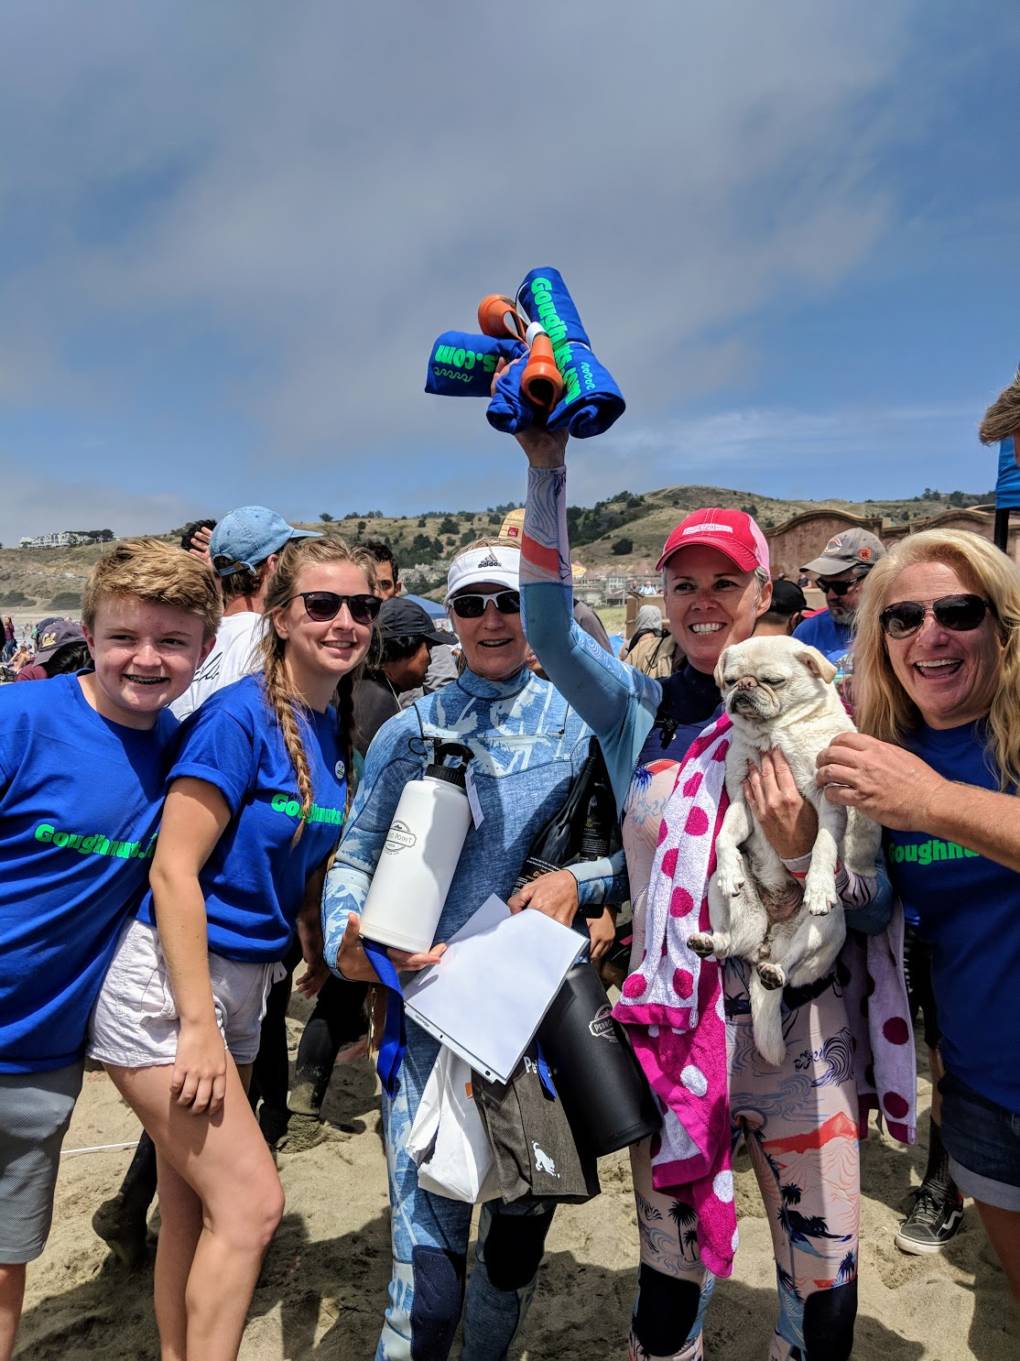 "Top Dog" Gidget and her owners Fiona Kempin and Alecia Nelson pose for pictures after her big win. Gidget does tricks like 360 turns and 'walking the board' during her surf events.